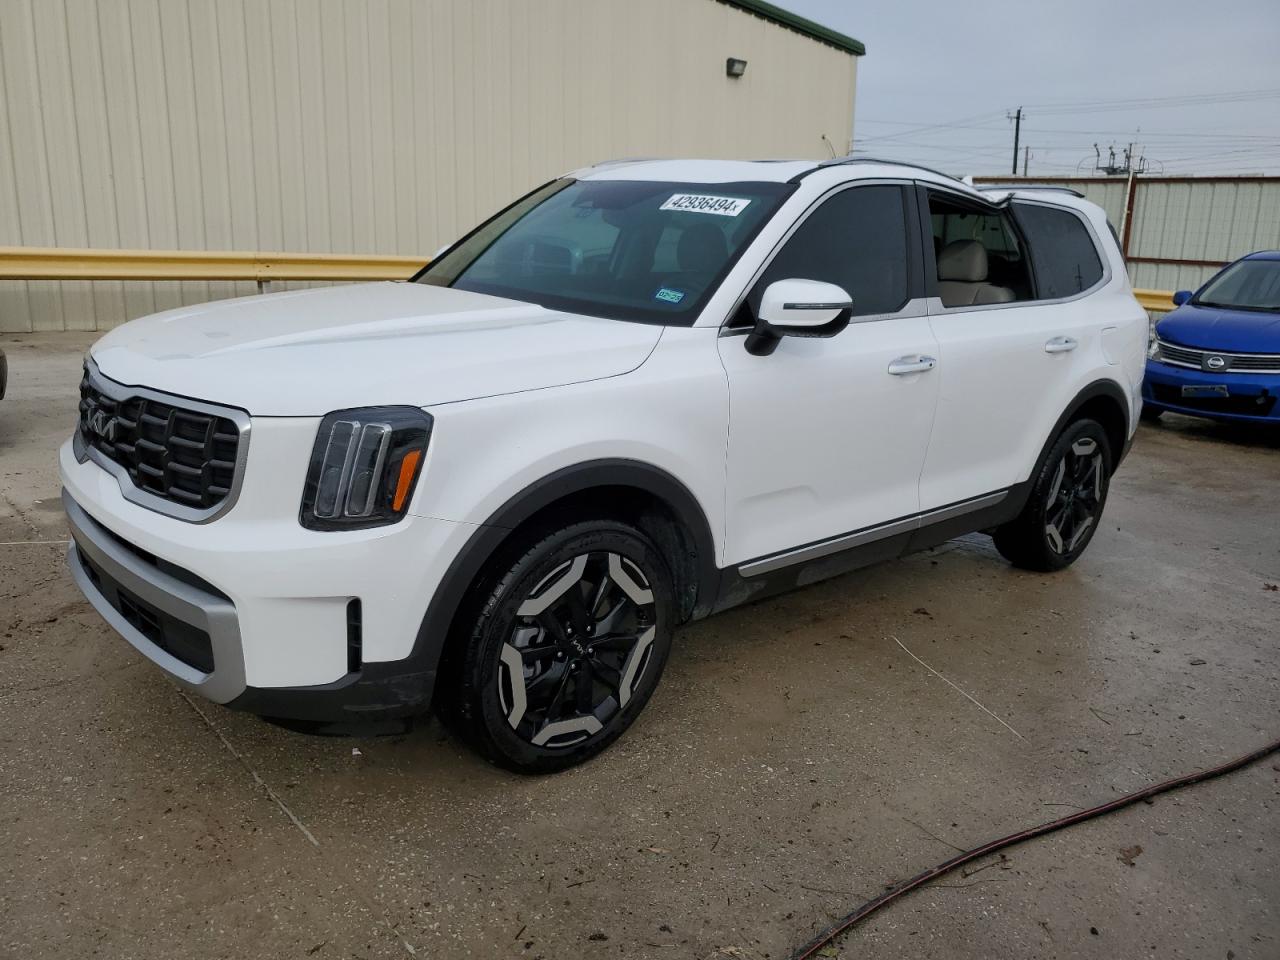 vin: 5XYP64GC8PG376793 5XYP64GC8PG376793 2023 kia telluride 3800 for Sale in 76052 3840, Tx - Ft. Worth, Haslet, USA